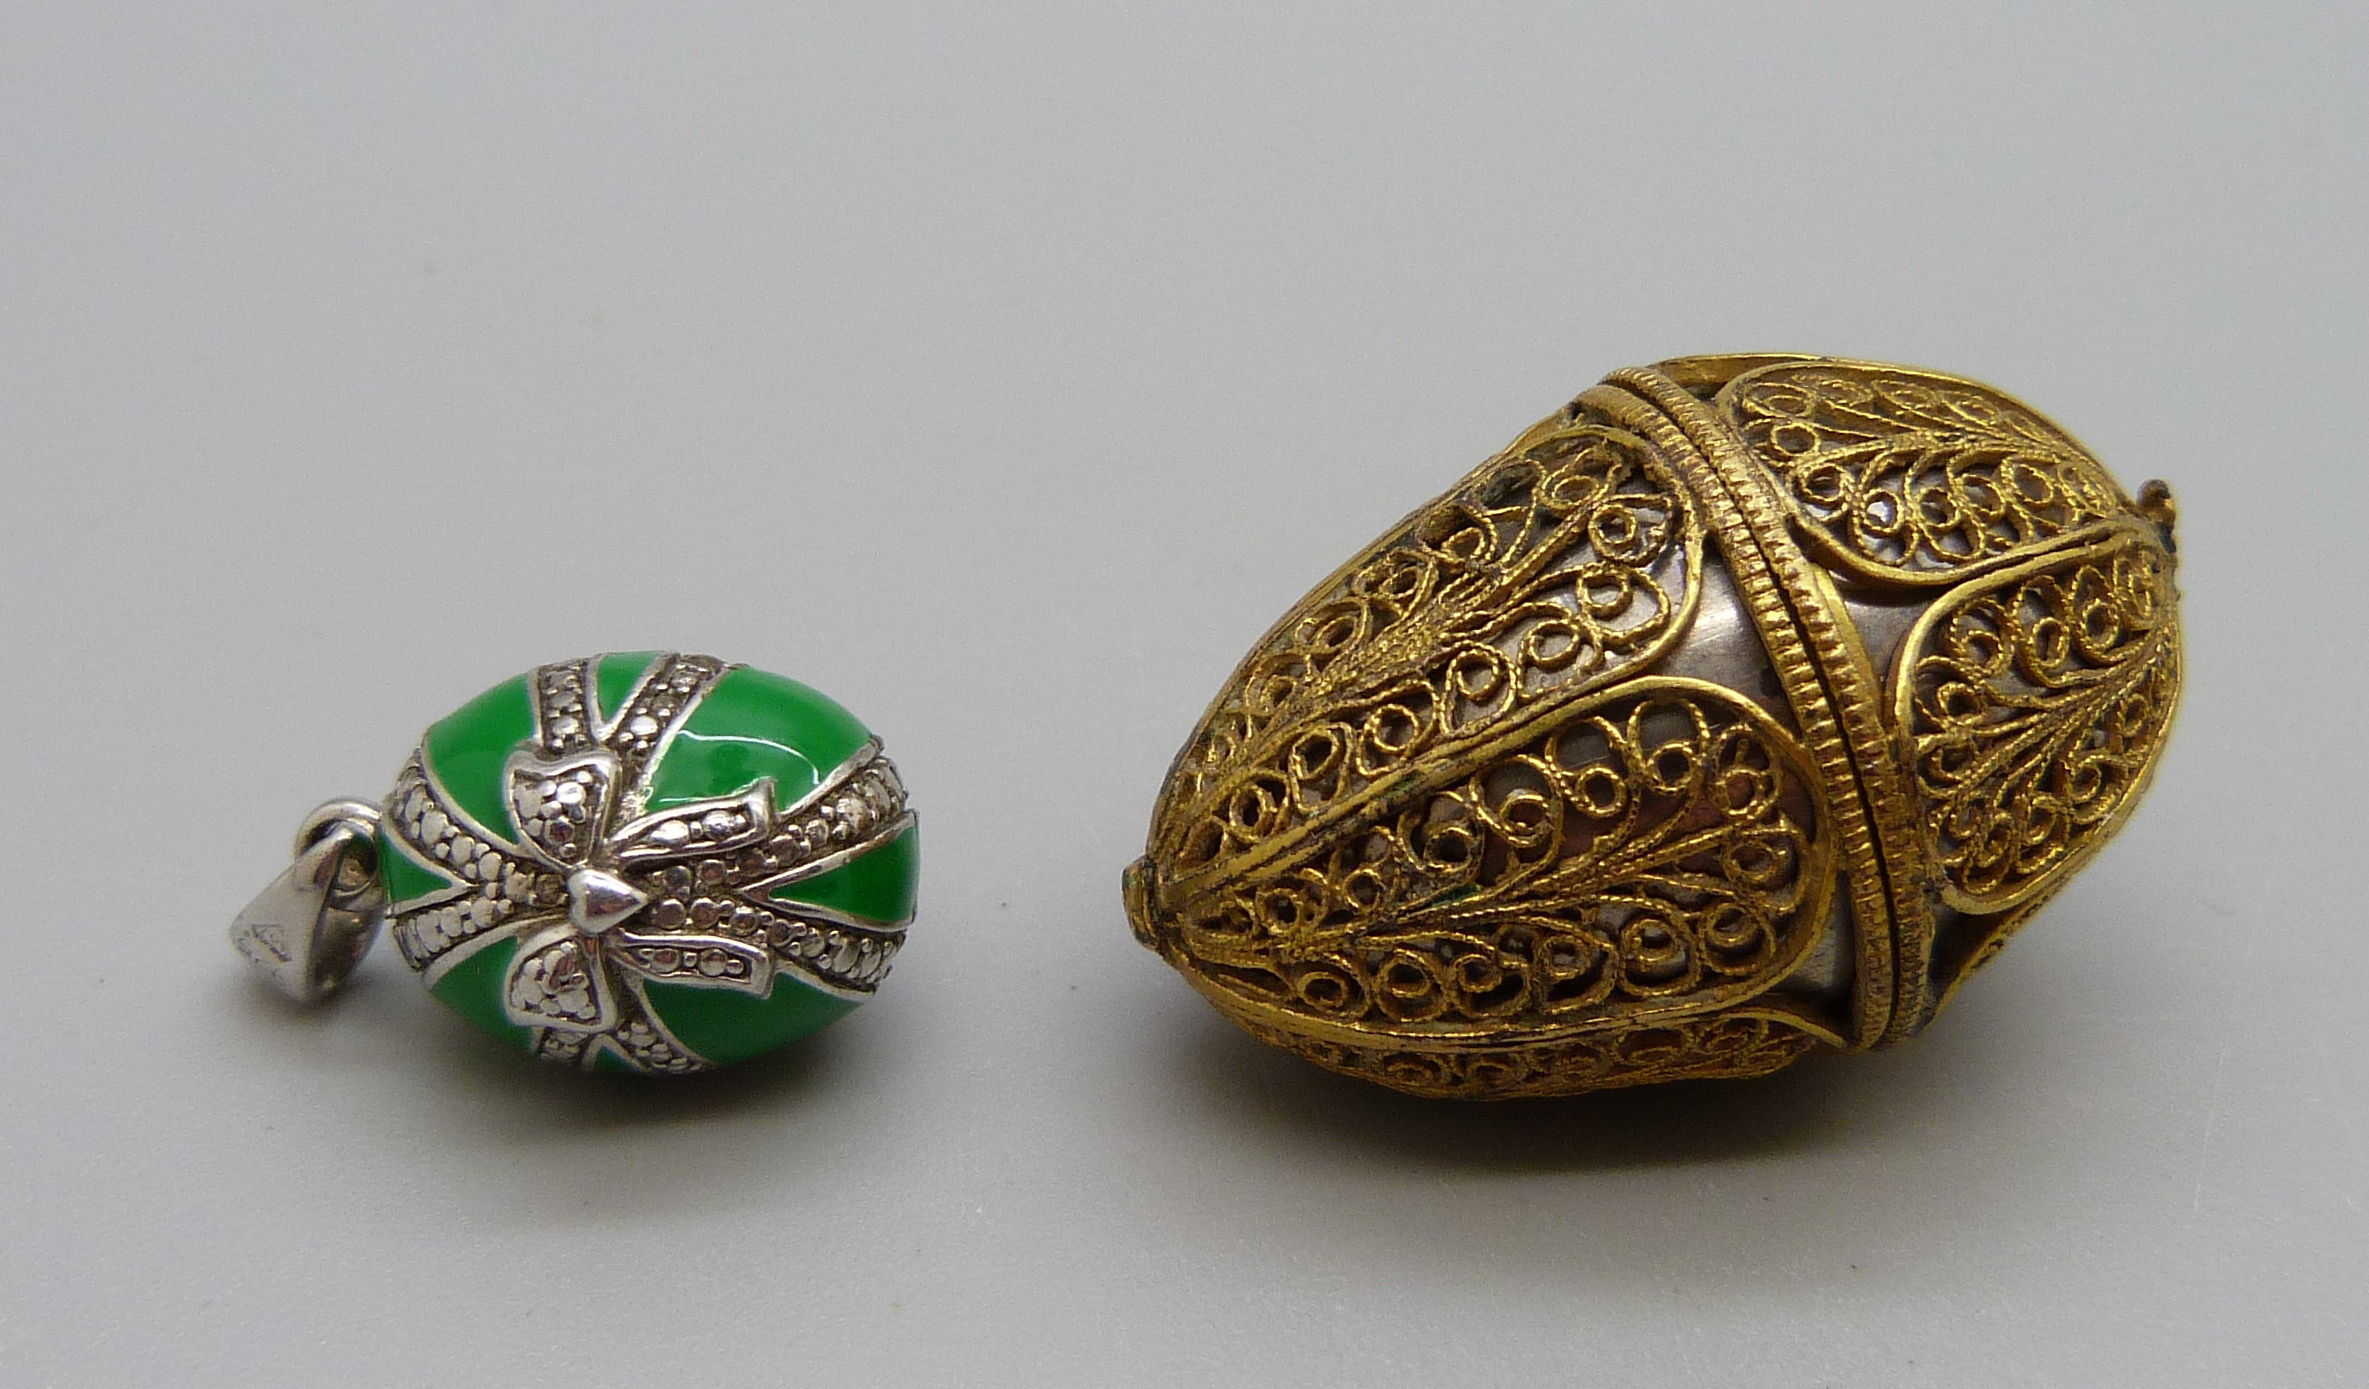 A silver gilt filigree egg thimble holder, hinge requires repair and a silver mounted pendant